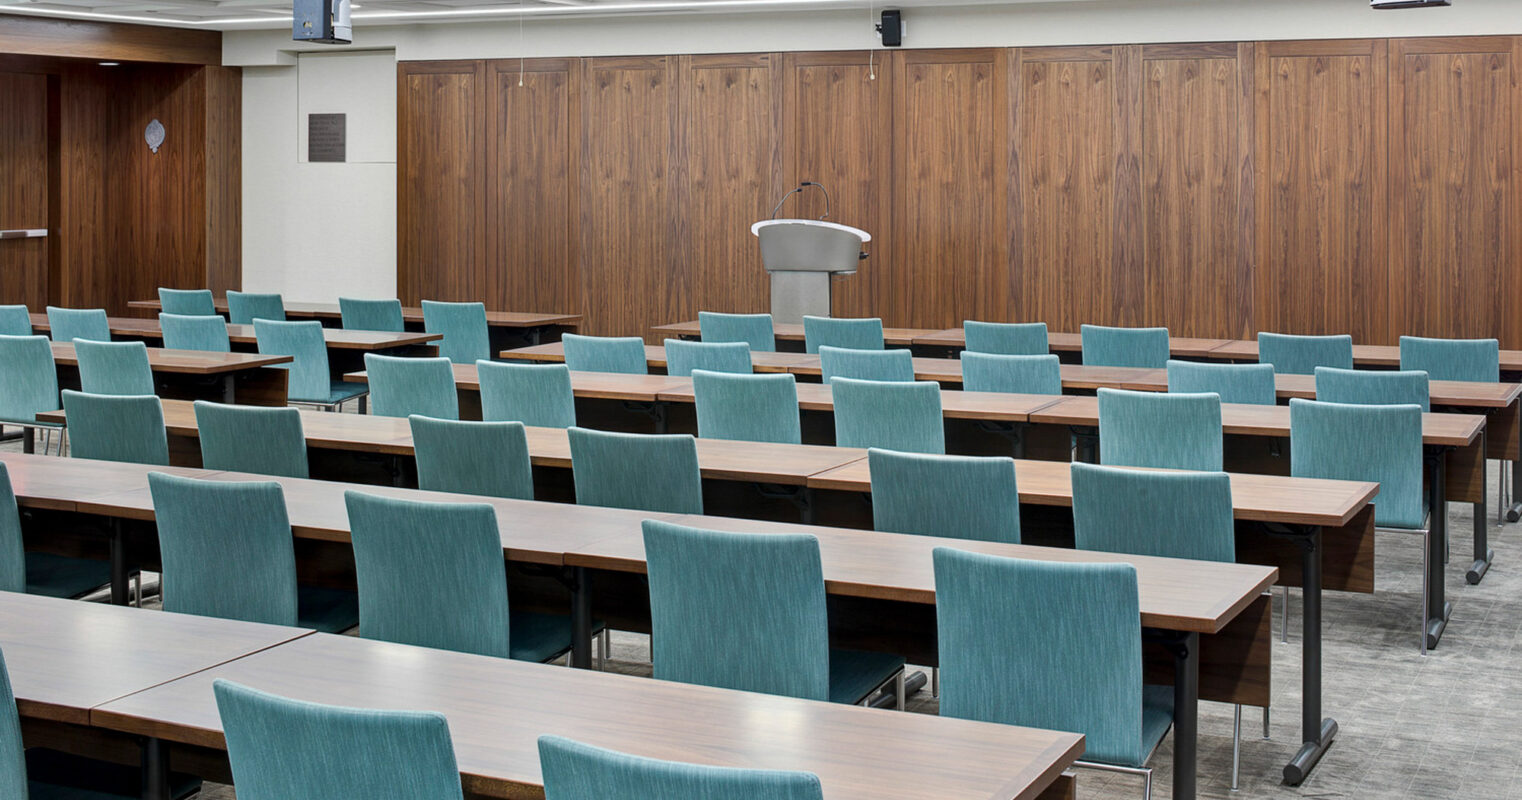 Modern conference room featuring rows of turquoise chairs, dark wood-paneled walls, and a sleek lecturer's podium. Overhead, linear lighting complements the room's clean lines.